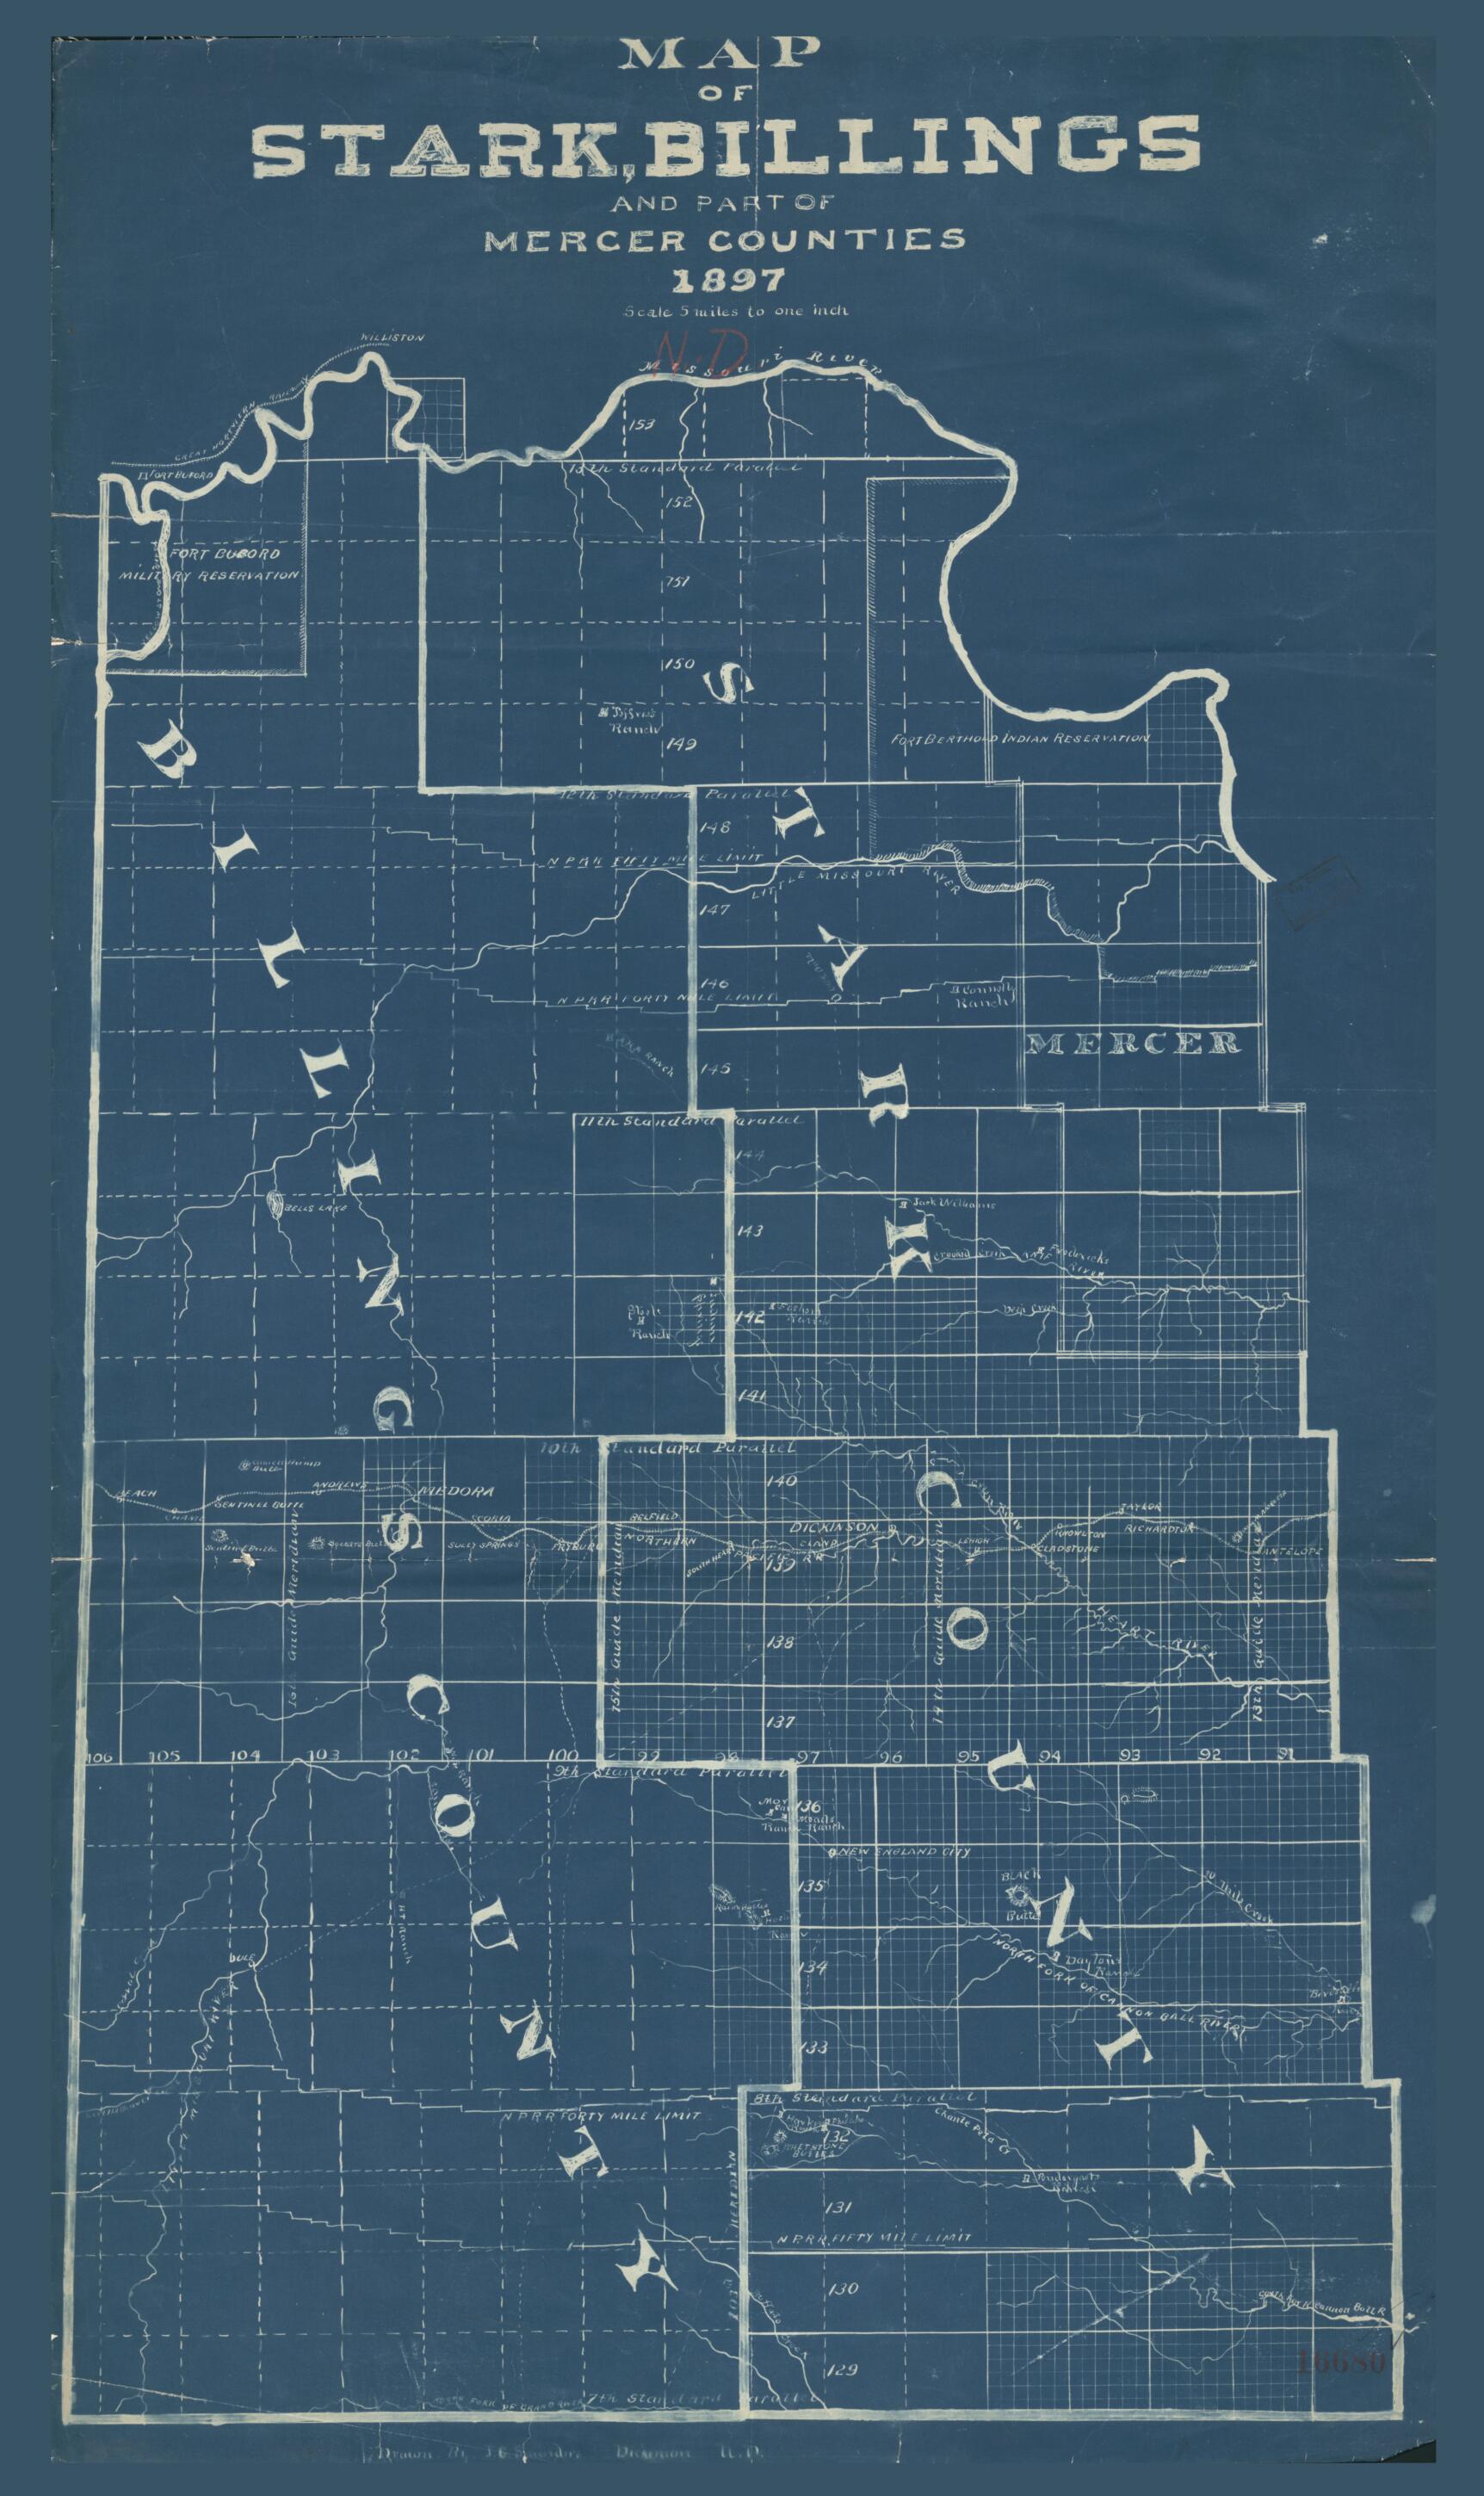 This old map of Map of Stark, Billings, and Part of Mercer Counties, from 1897 was created by J. G. Saunders in 1897